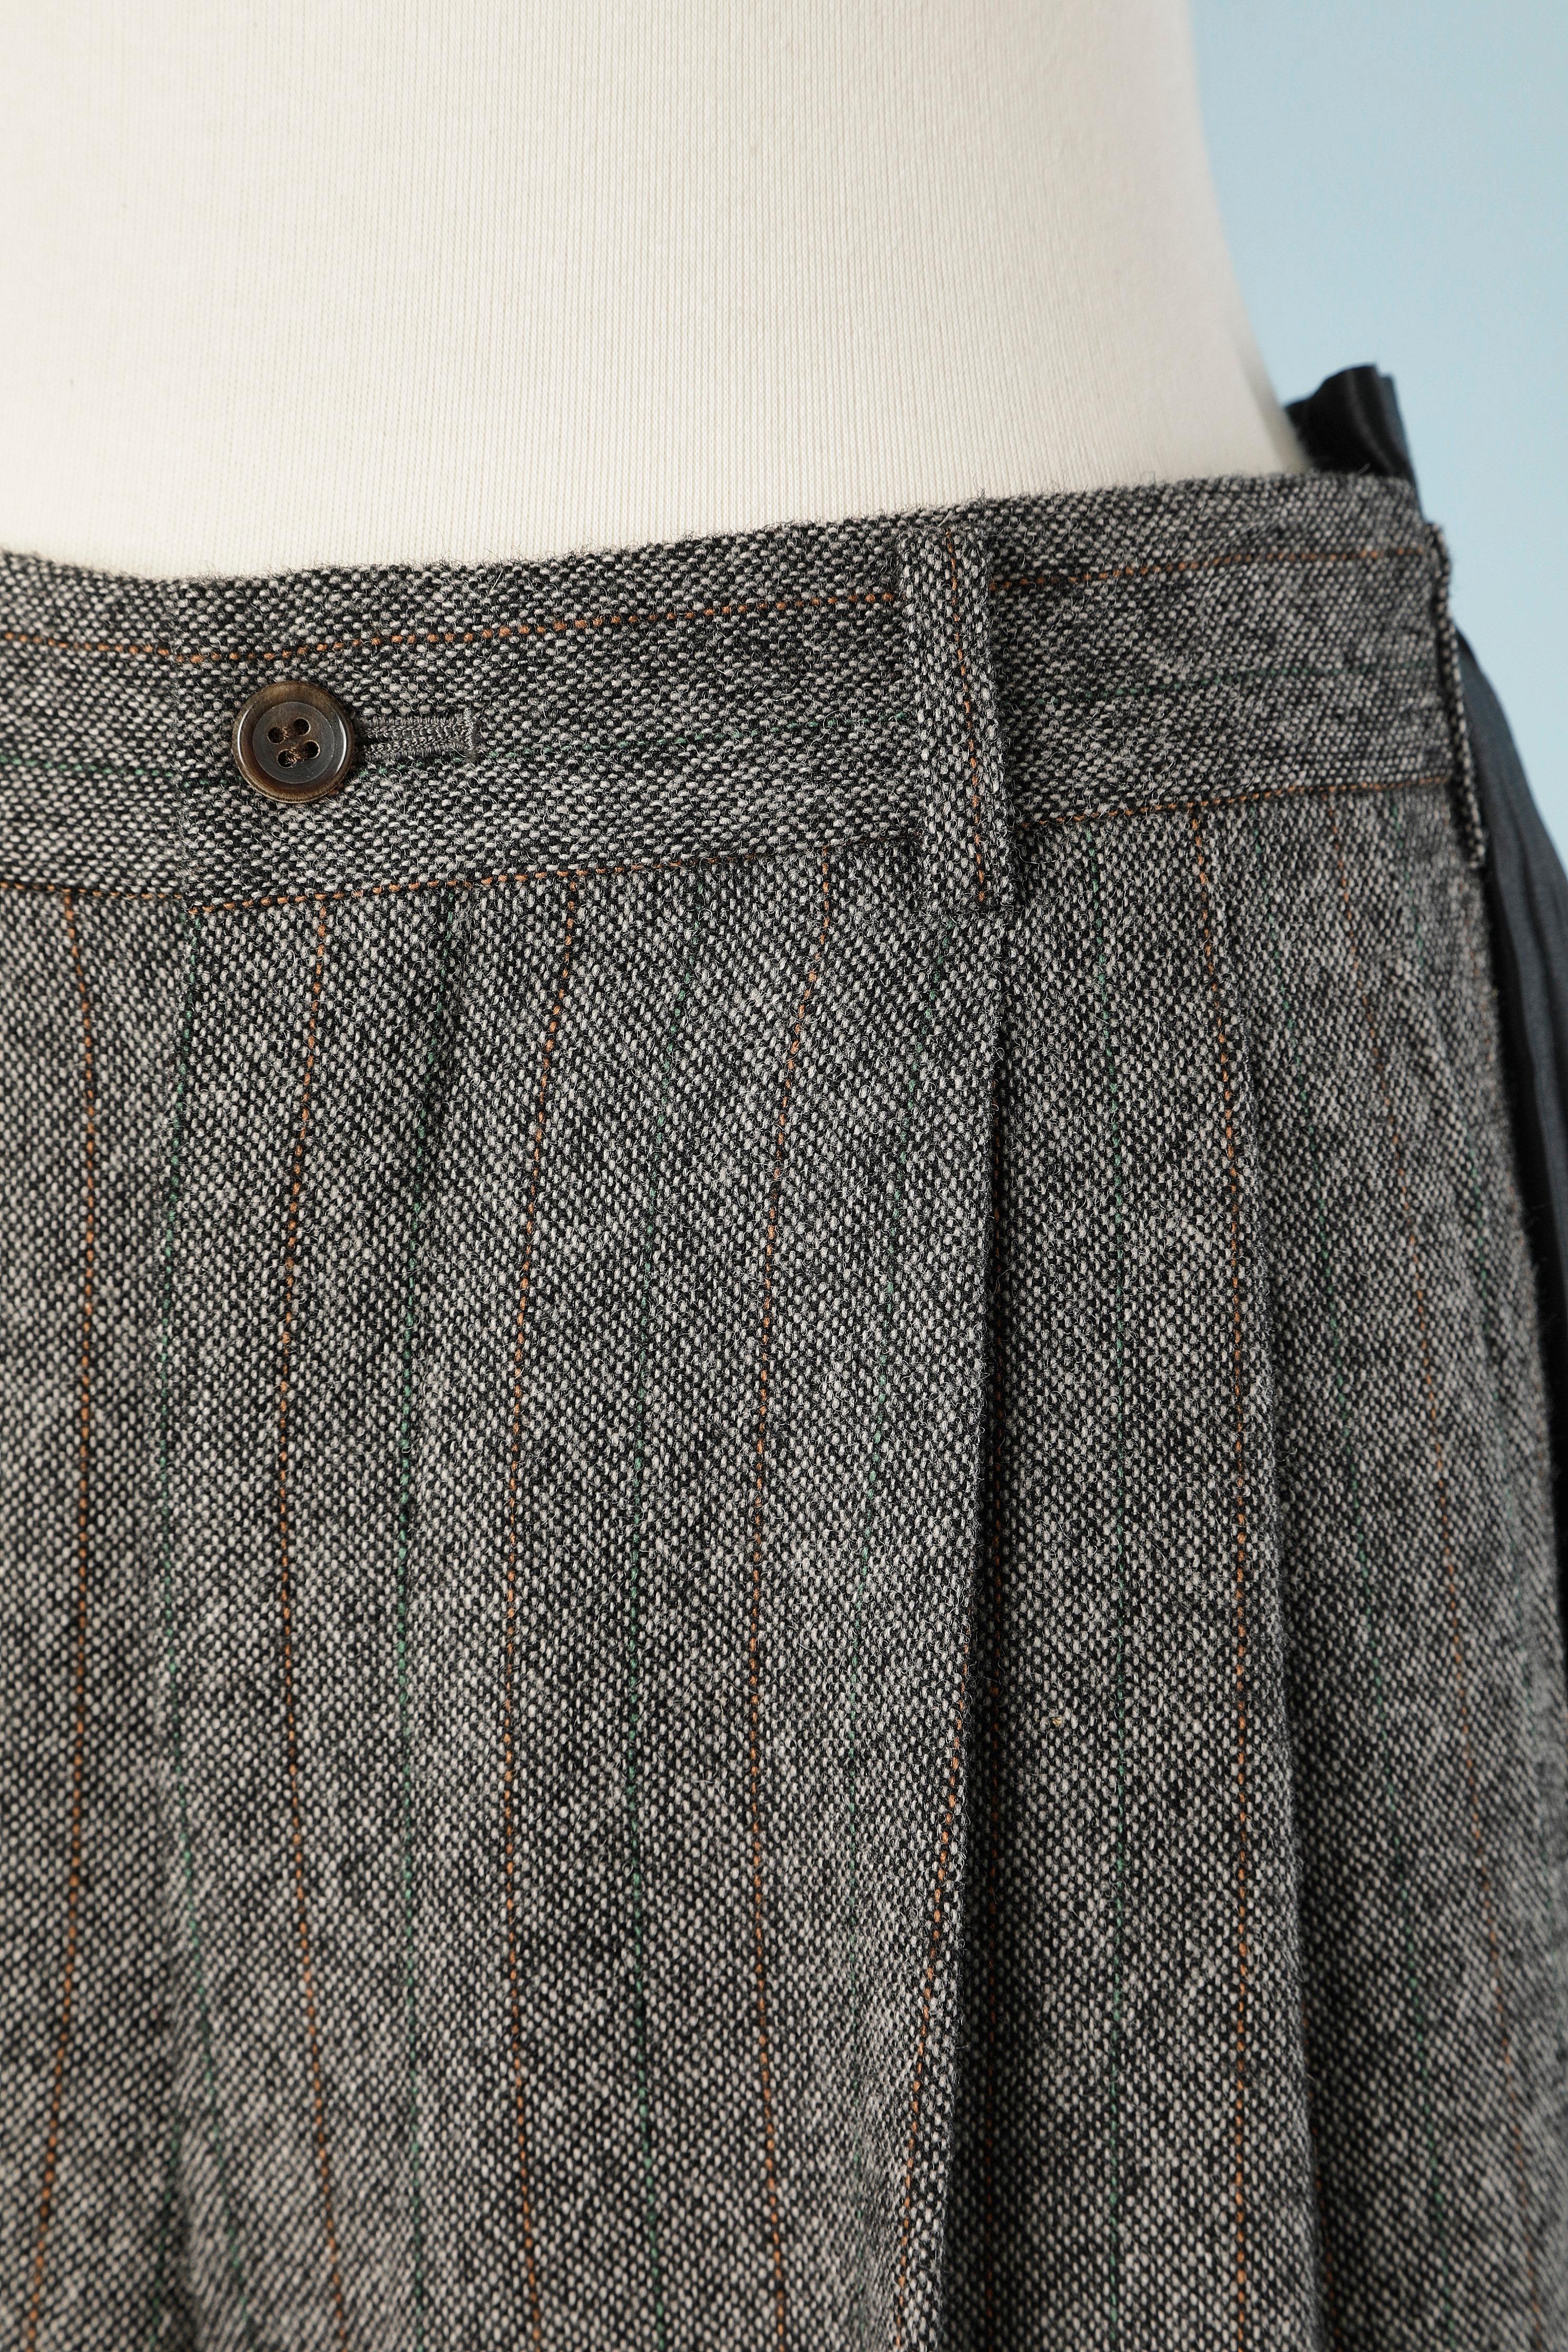 Mix tweed pants and black pleated skirt. Pocket, zip, button, buttonhole, belt-loop and Cupra lining in the pant. 
Pant fabric composition: 96% wool, 4 % nylon. (pant lining: 100% Cupra) 
Skirt composition: 100% polyester.
SIZE M
